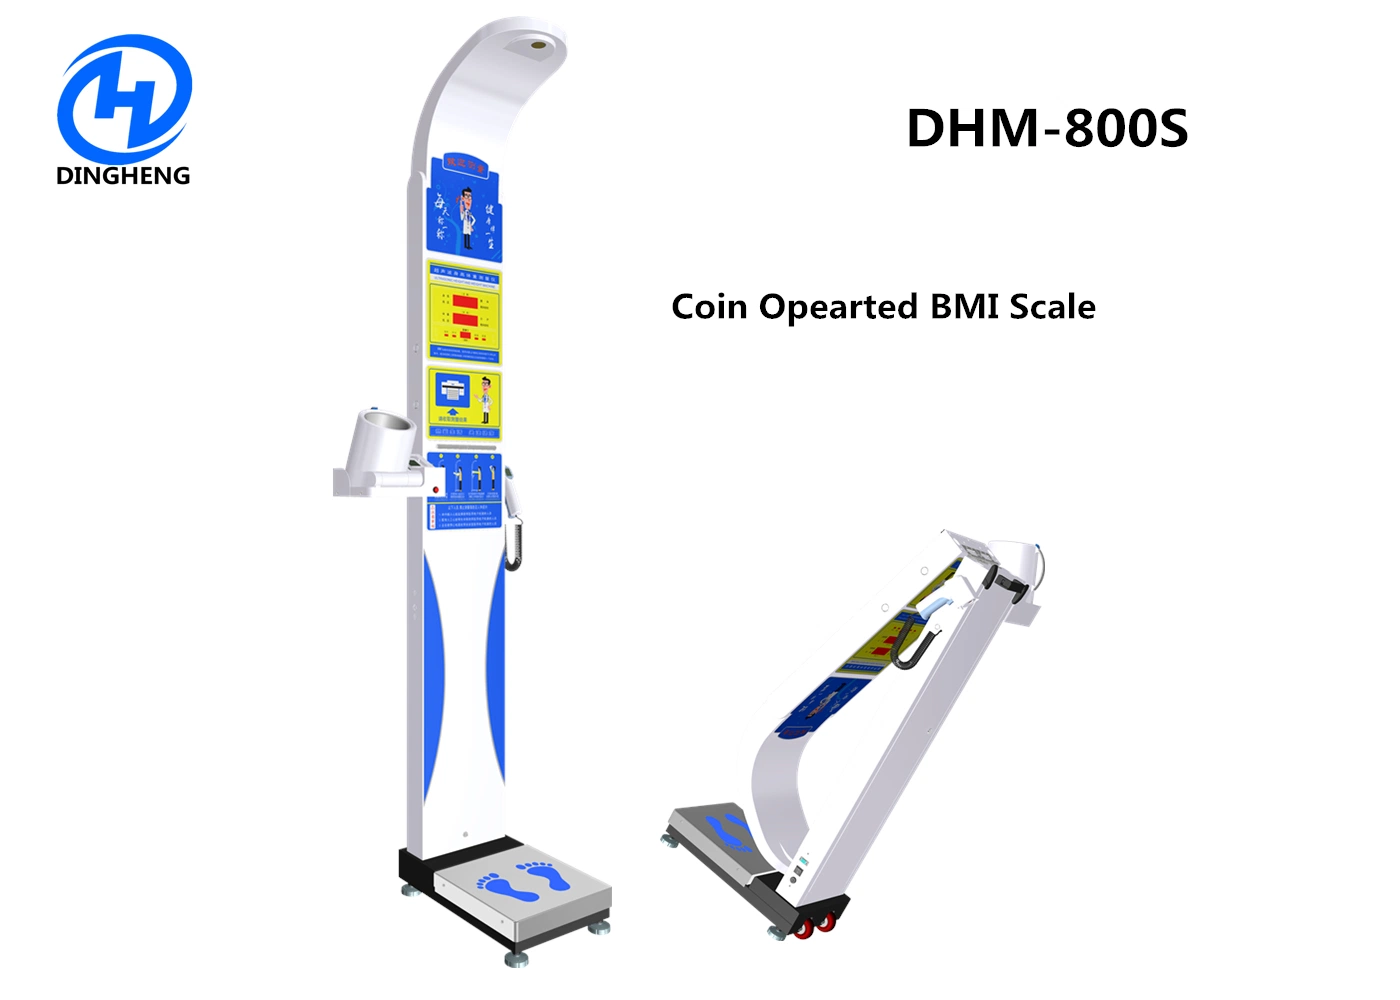 Dhm-800s BMI Coin Ultrasonic Medical Height and Weight Printable Scale